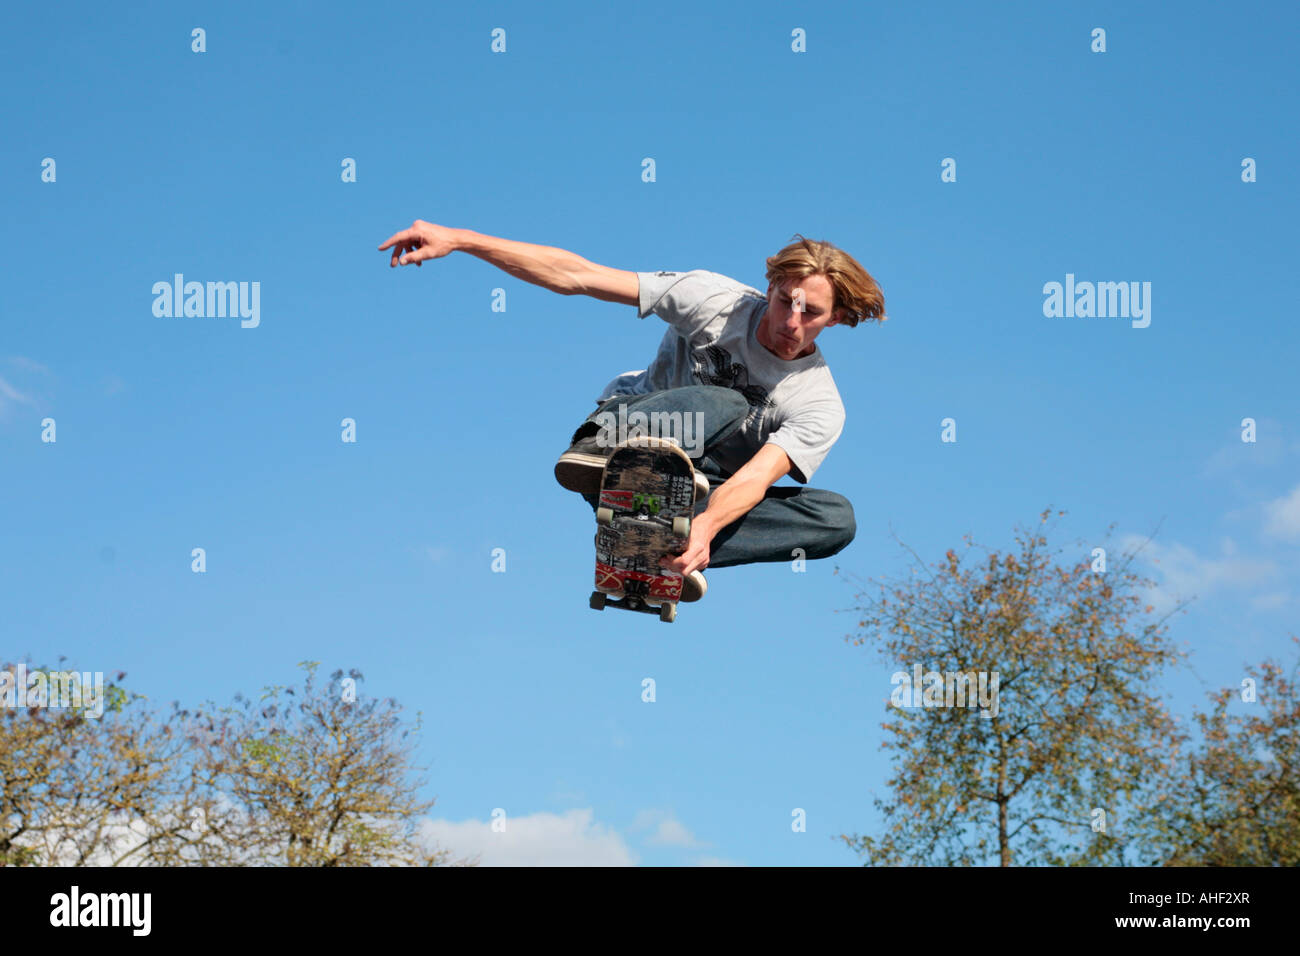 a young man jumping with his skateboard Stock Photo